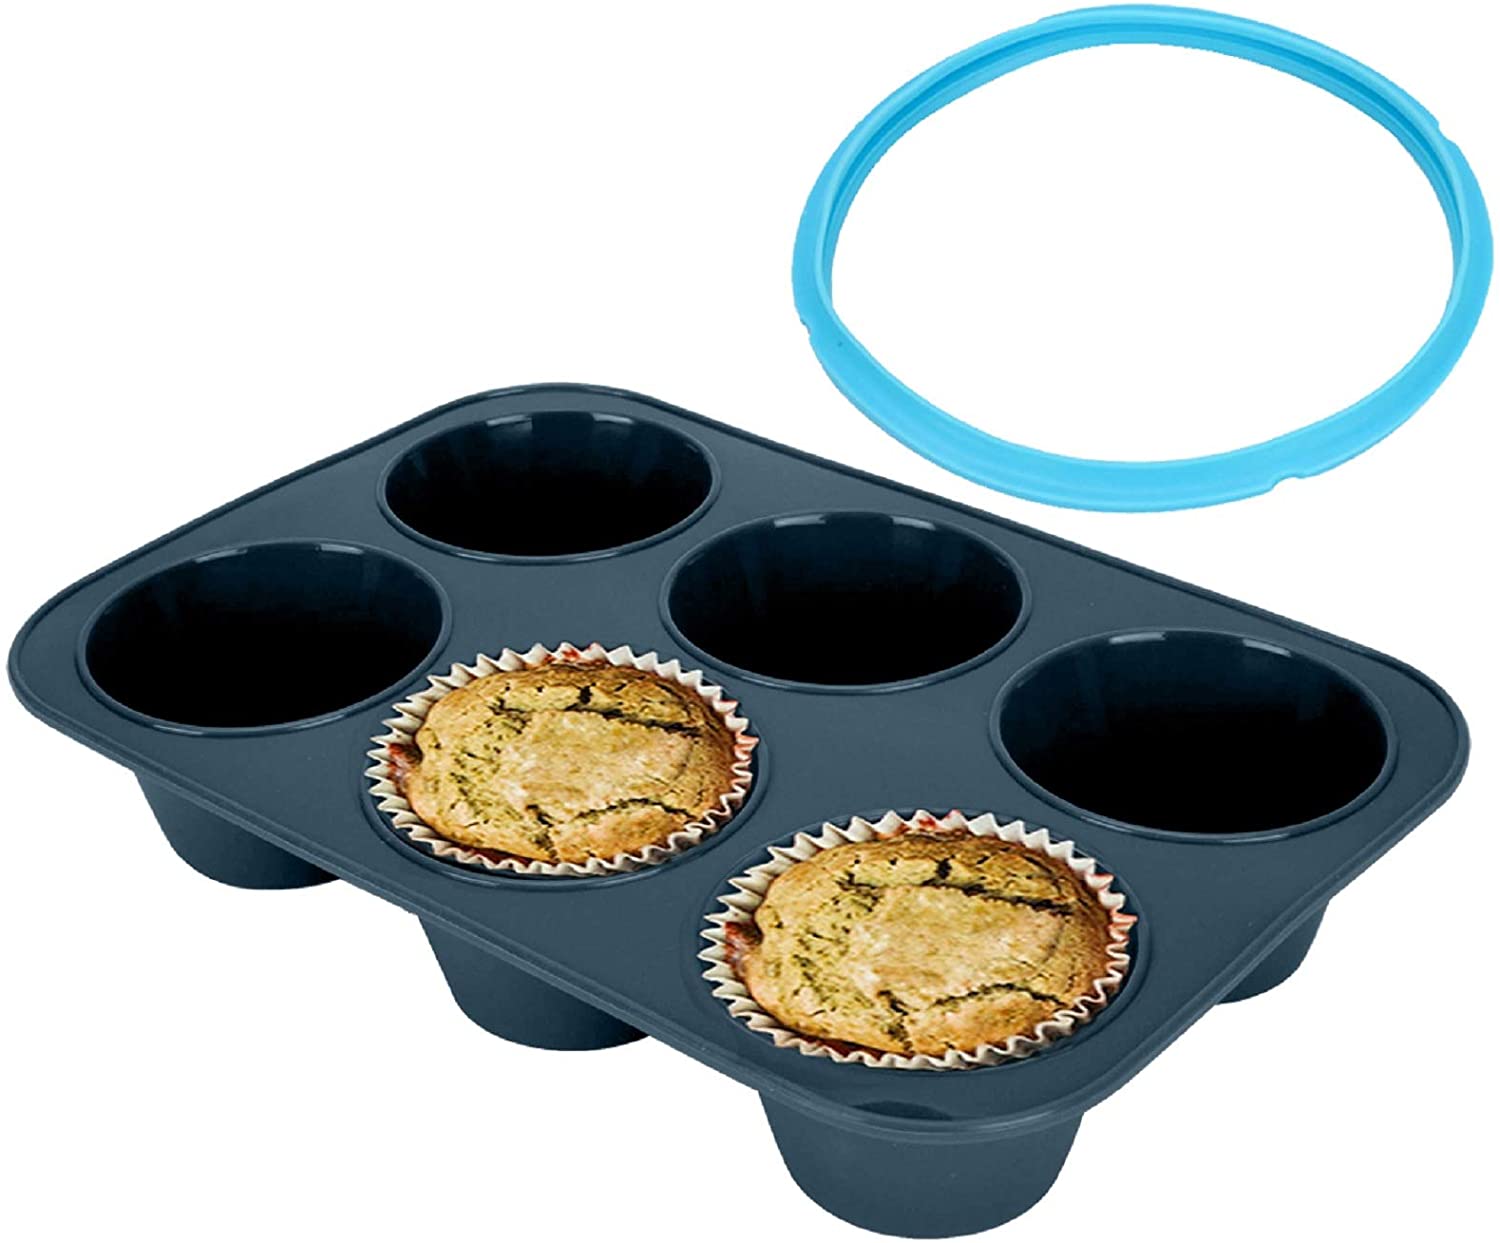 Amazing Silicone Giant Cupcake Pan – My Kitchen Gadgets